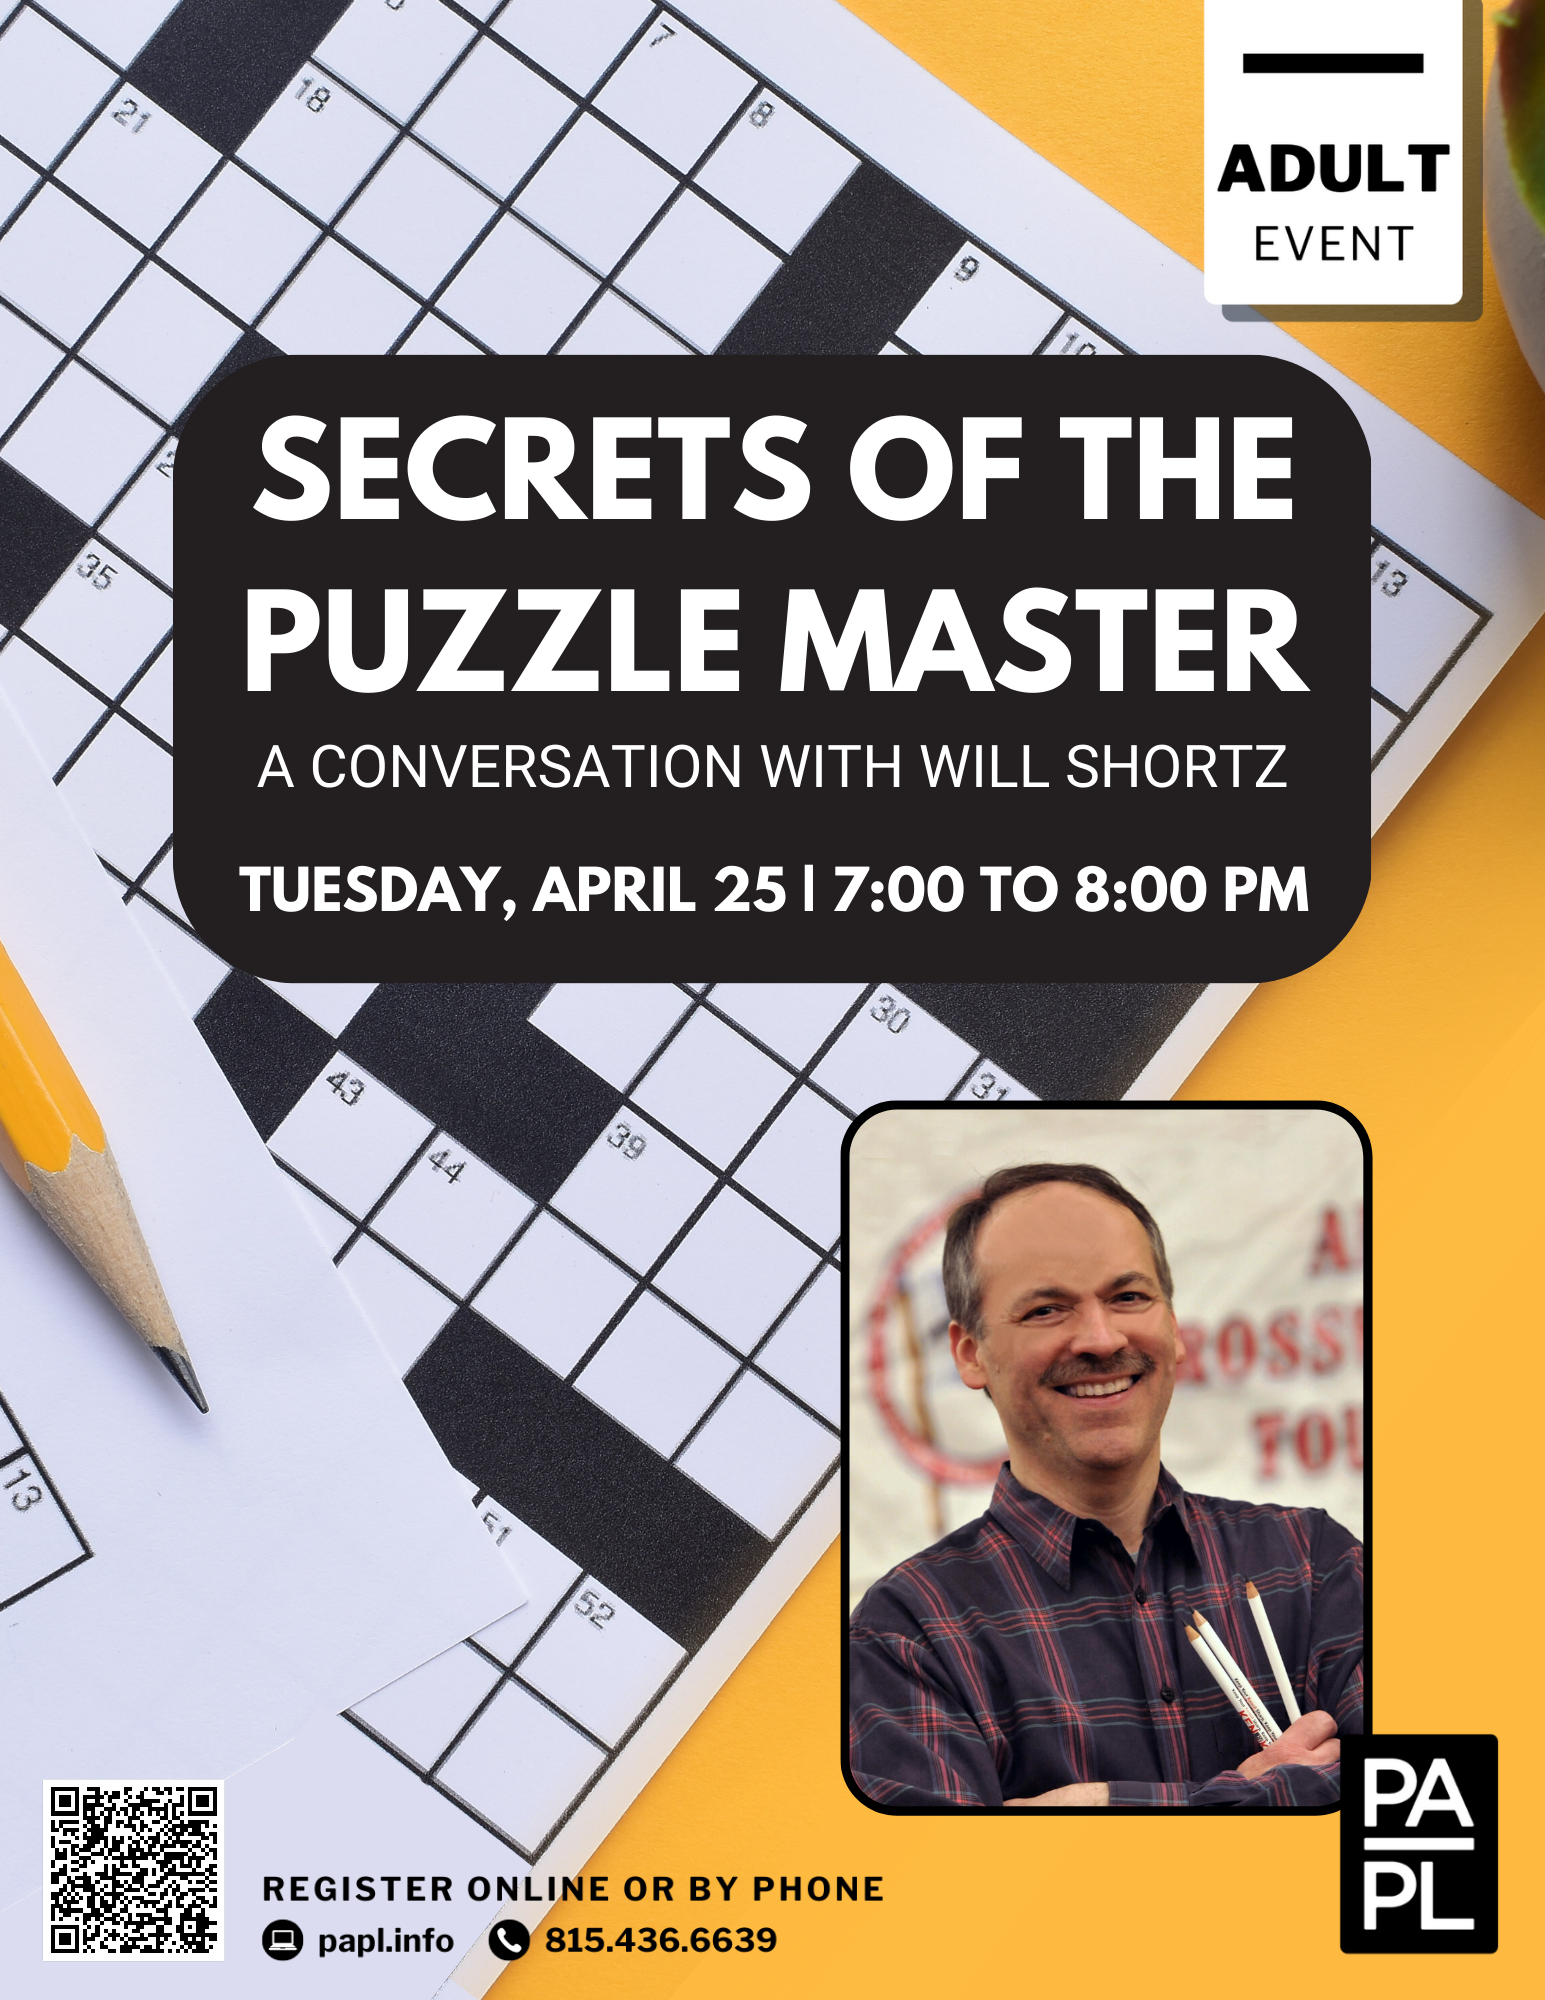 Secrets of the Puzzle Master: A Conversation with Will Shortz